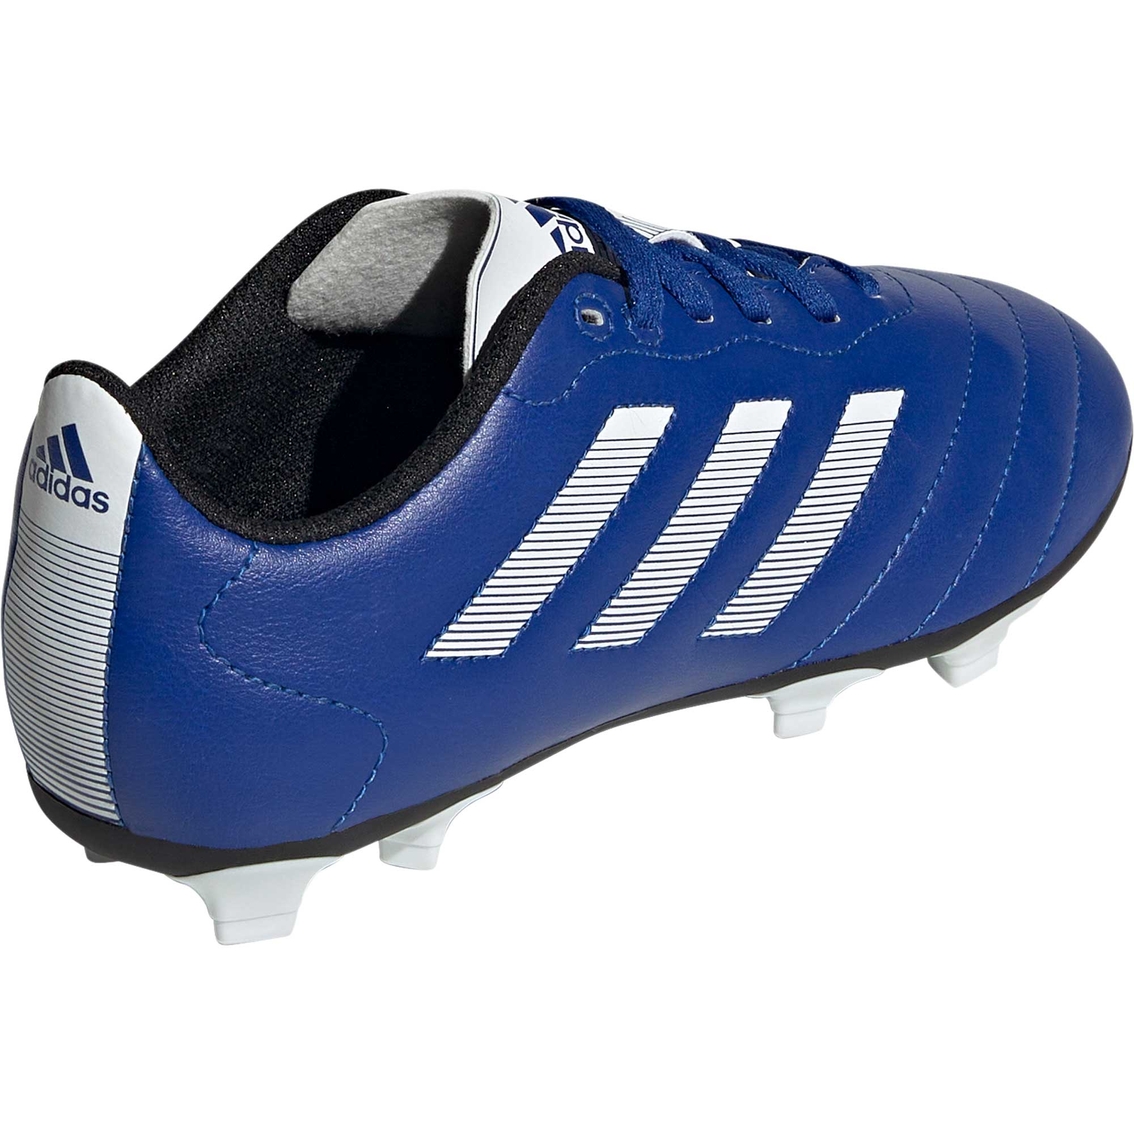 Adidas Grade School Boys Goletto VII Firm Ground Jr. Soccer Cleats - Image 2 of 7